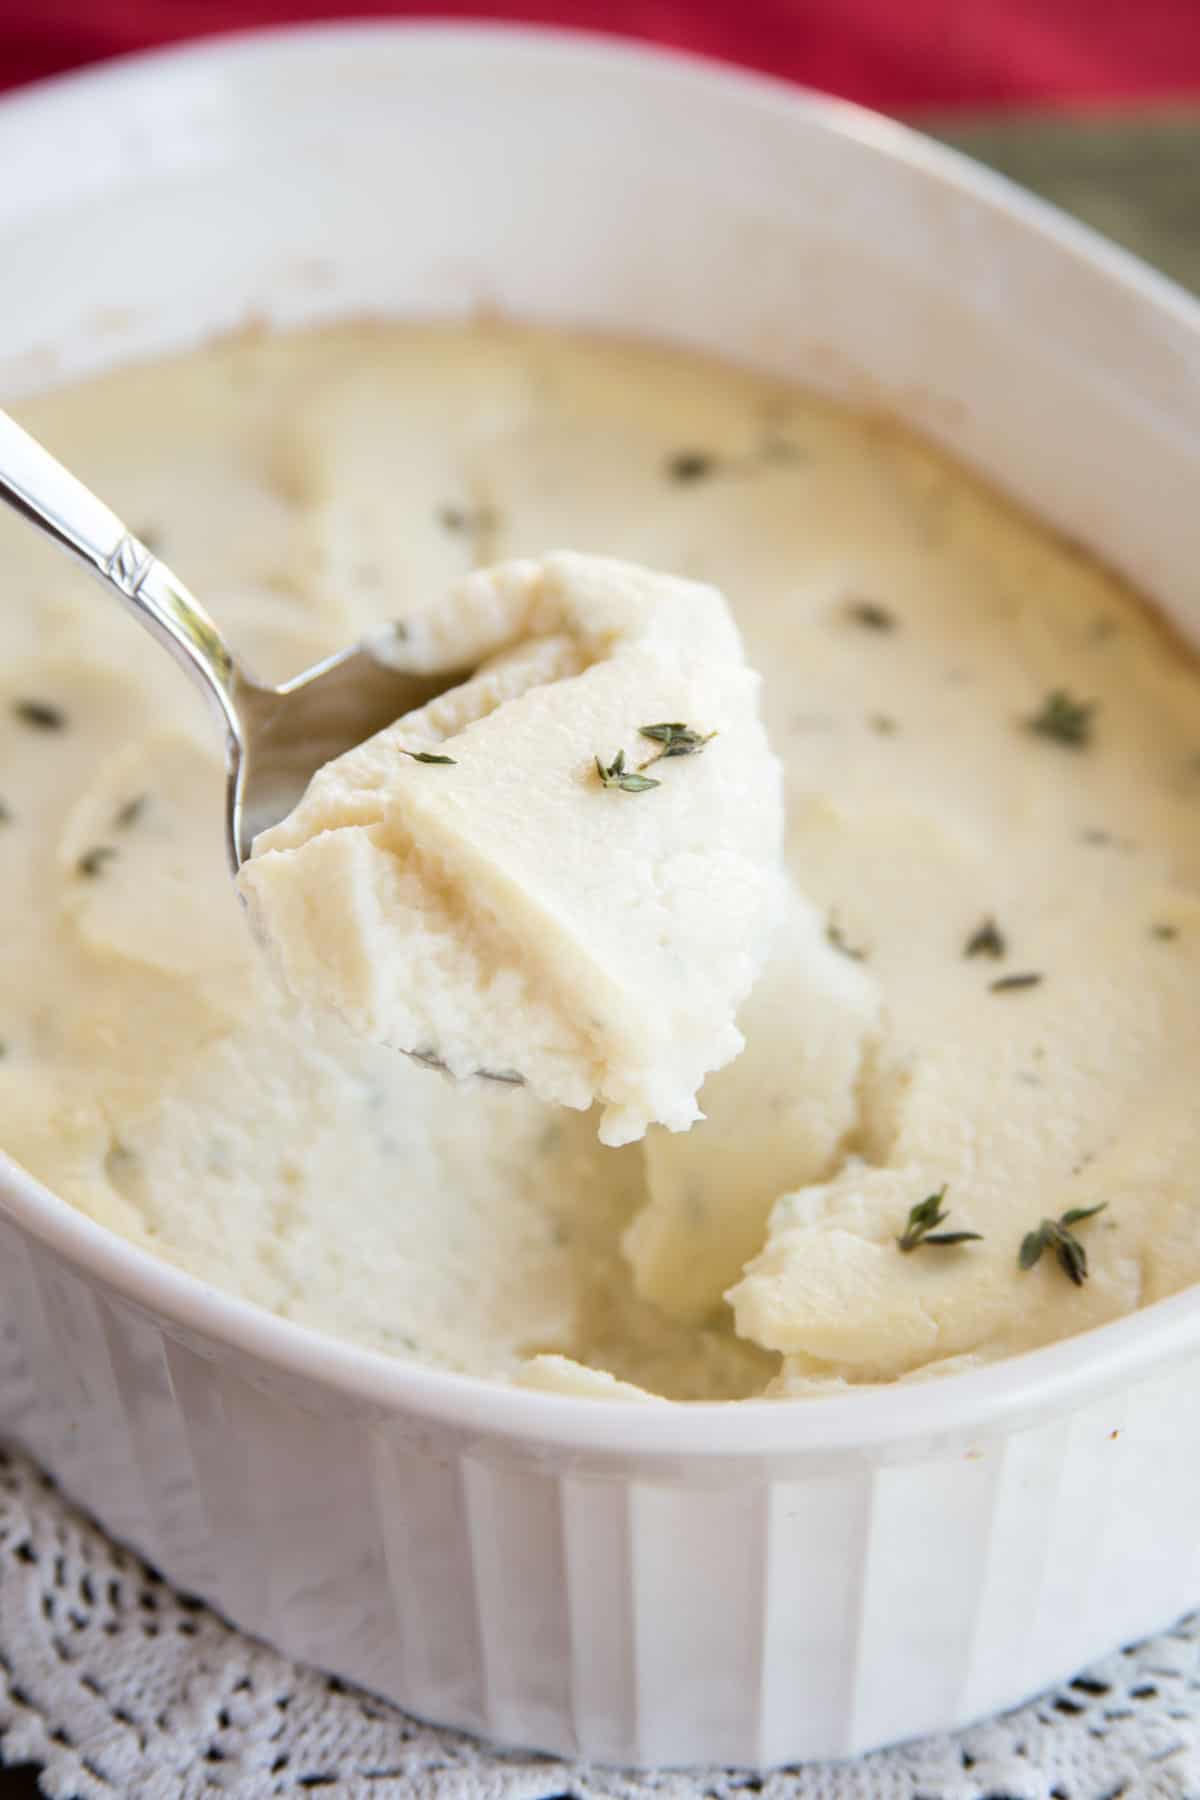 Goat cheese whipped cauliflower in a white casserole dish garnished with thyme being scooped up with a serving spoon.